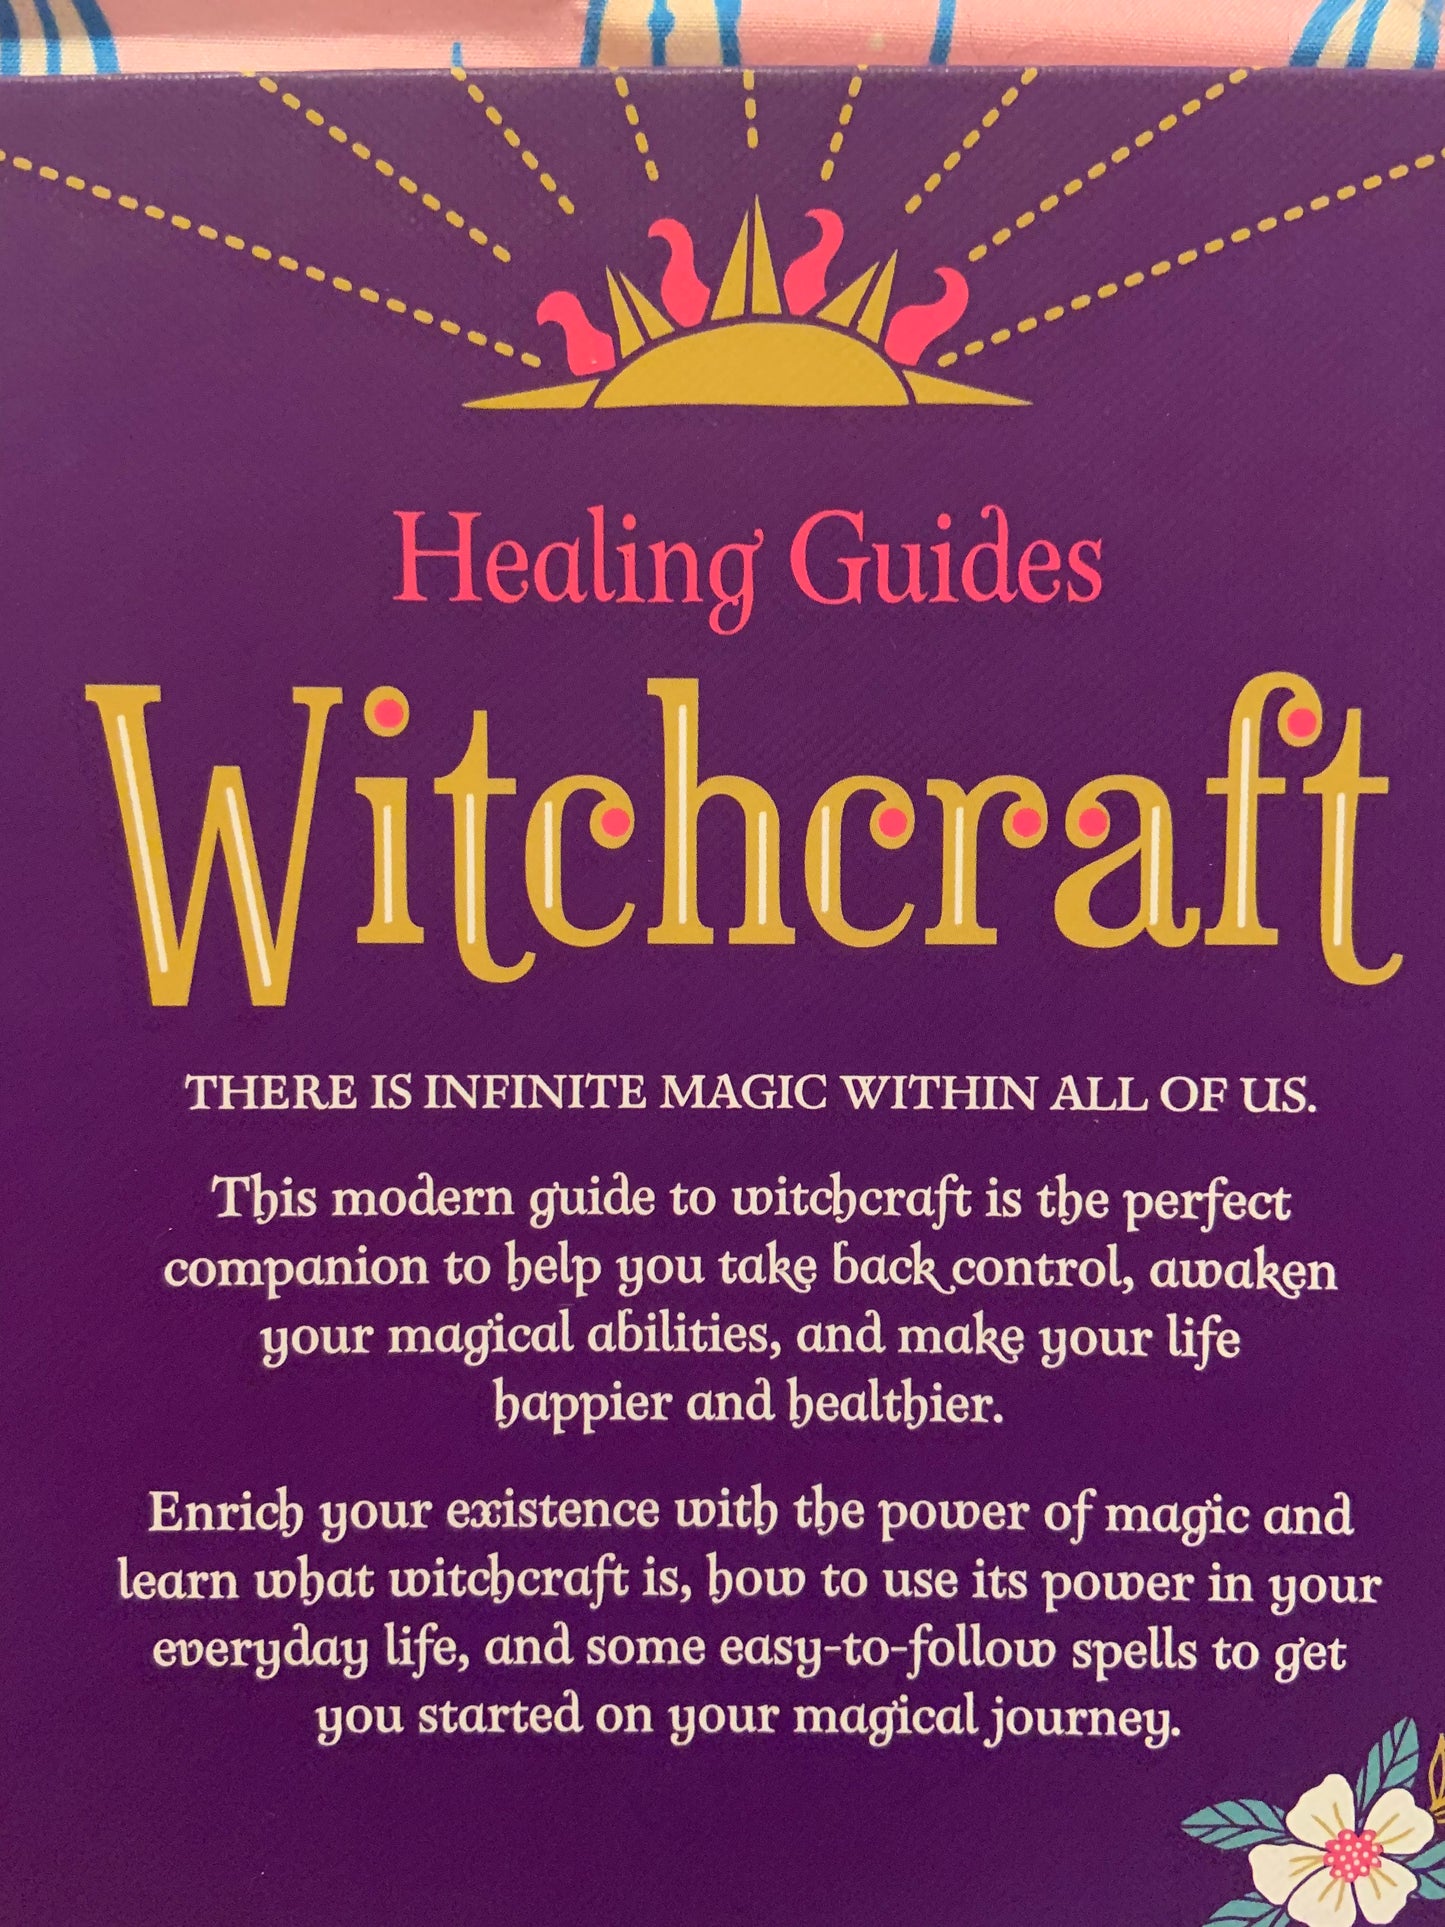 Witchcraft: The Modern Book of Magic book